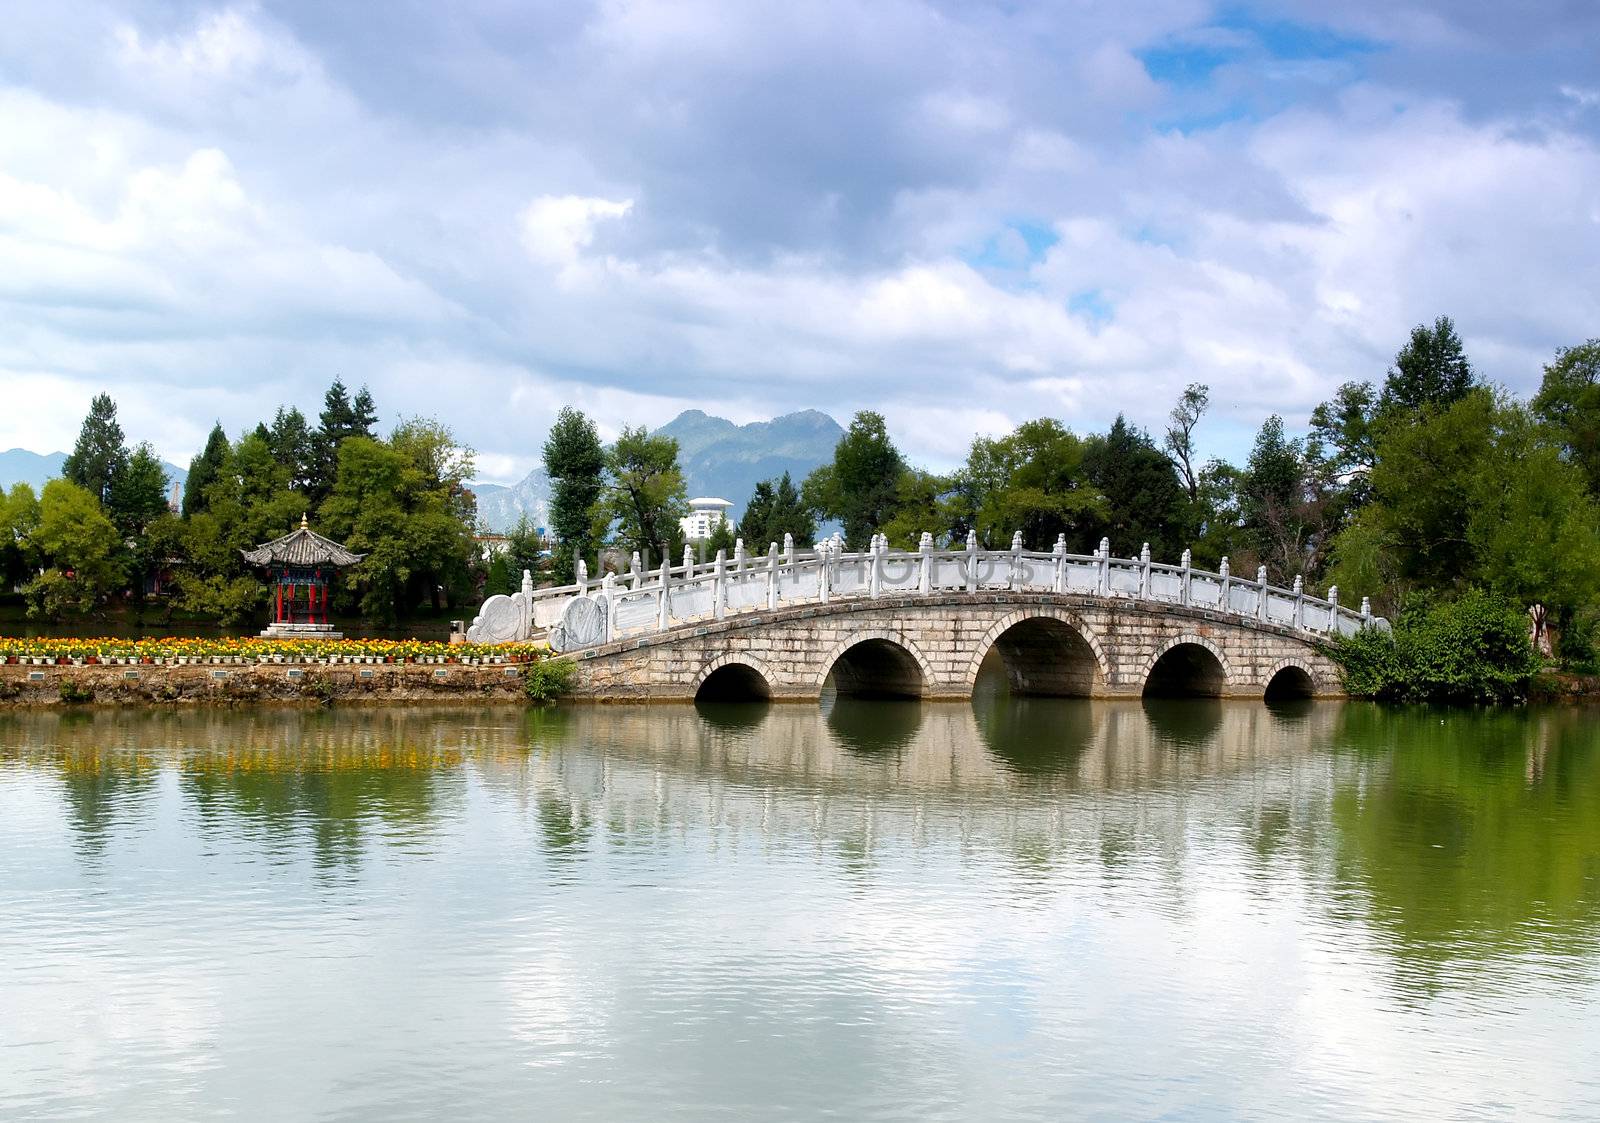 A scenery park in Lijiang China - a top tourist attraction